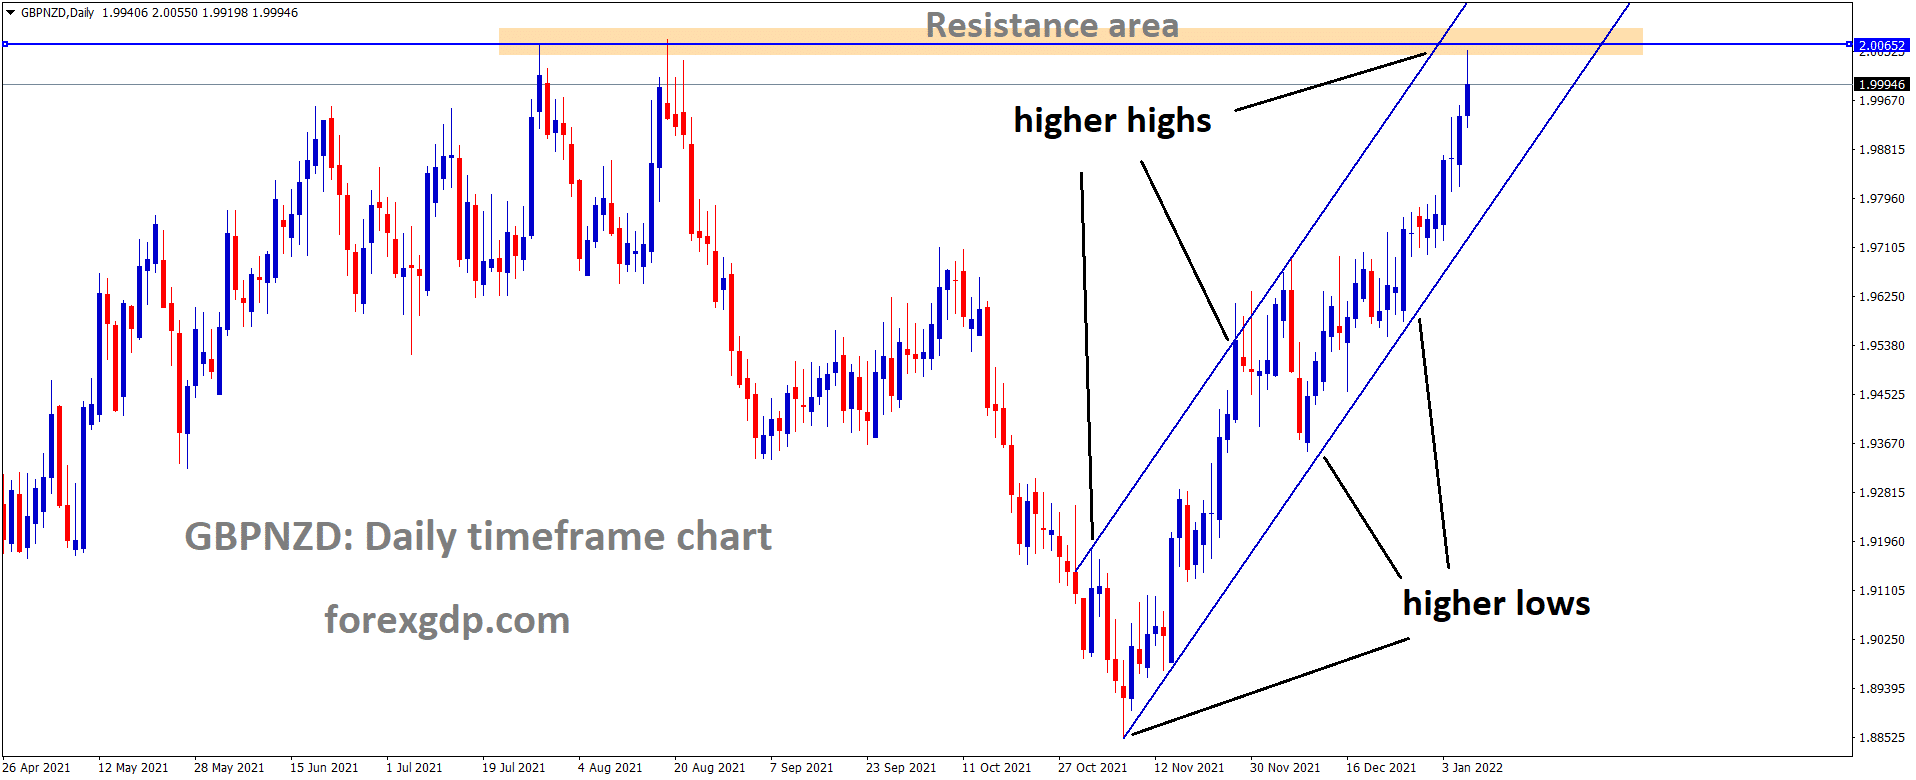 GBPNZD is moving in an Ascending channel and the market has reached the Horizontal resistance area of the channel 1